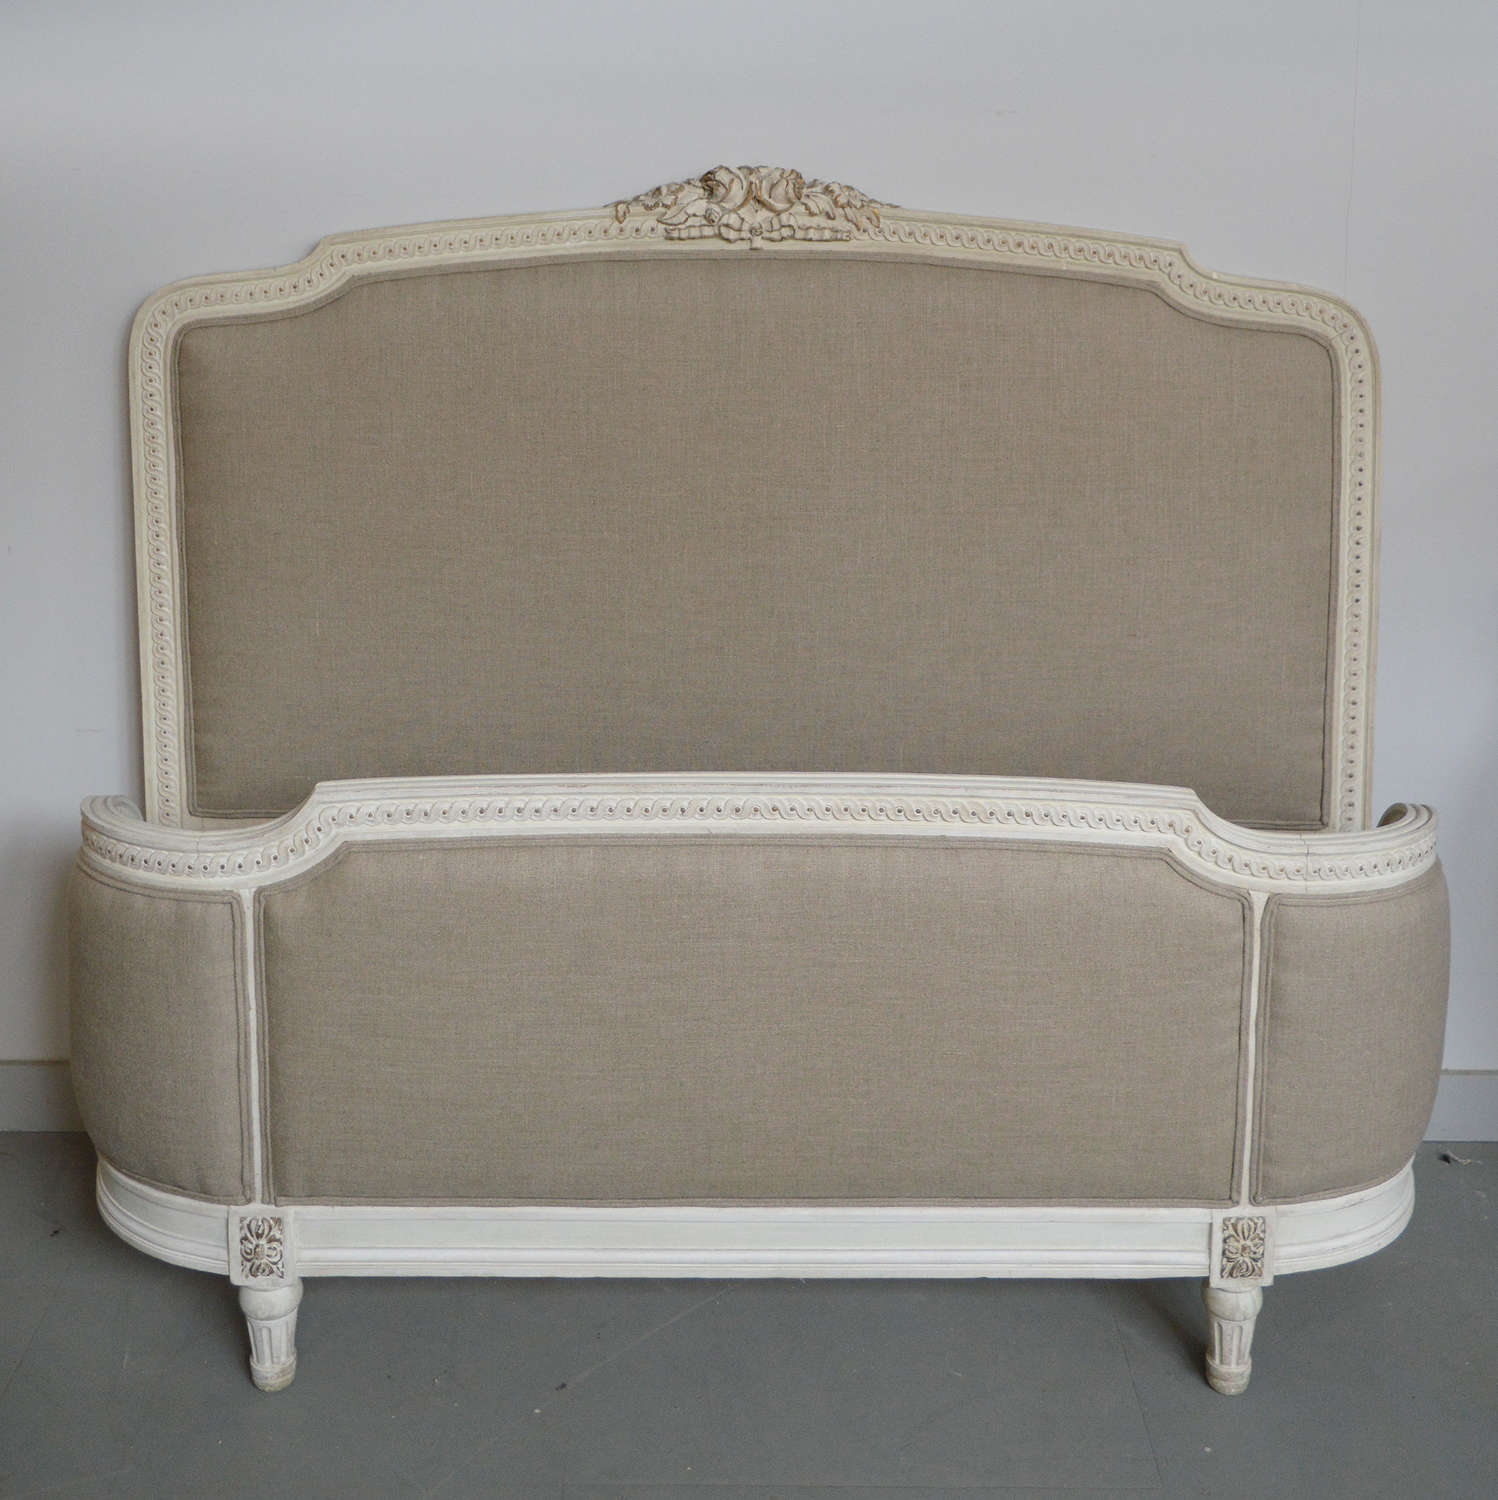 Late 19th Century Louis XVI style Upholstered double bedstead